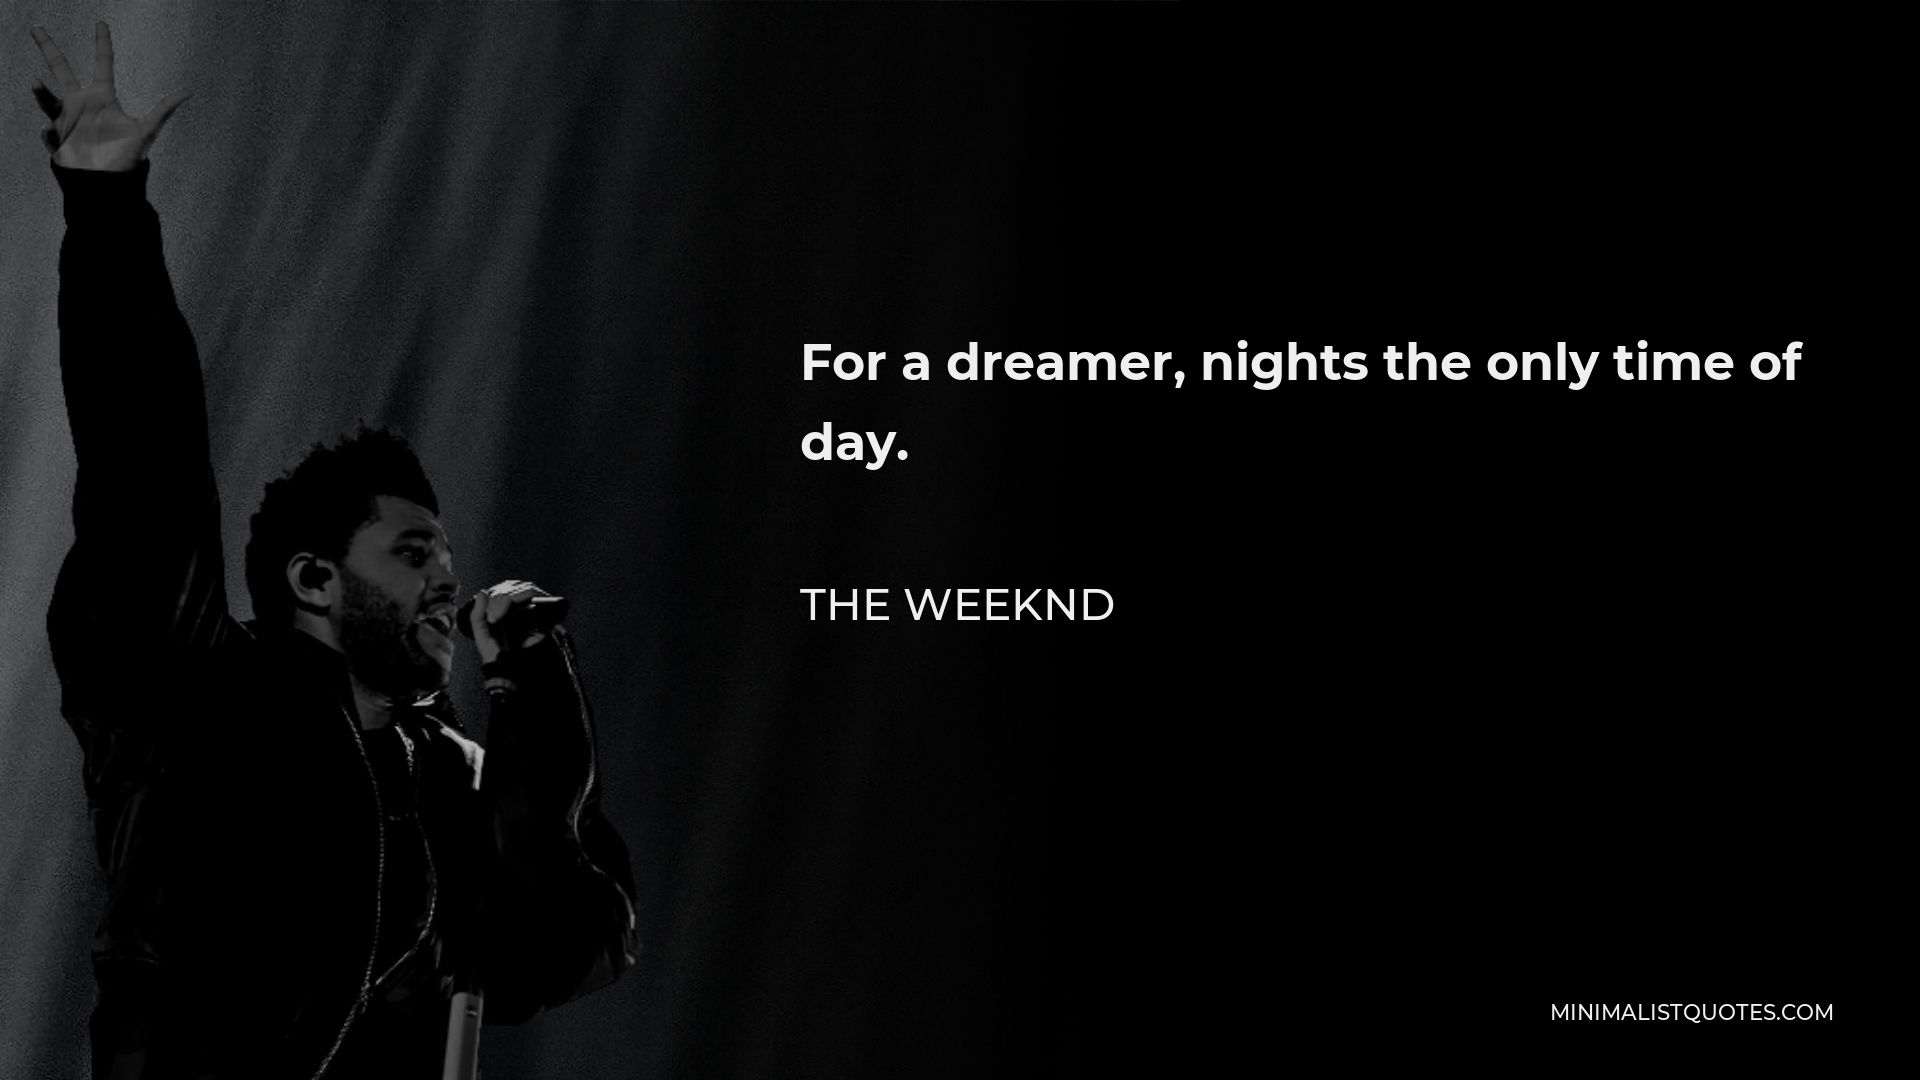 The Weeknd Quote - For a dreamer, nights the only time of day.